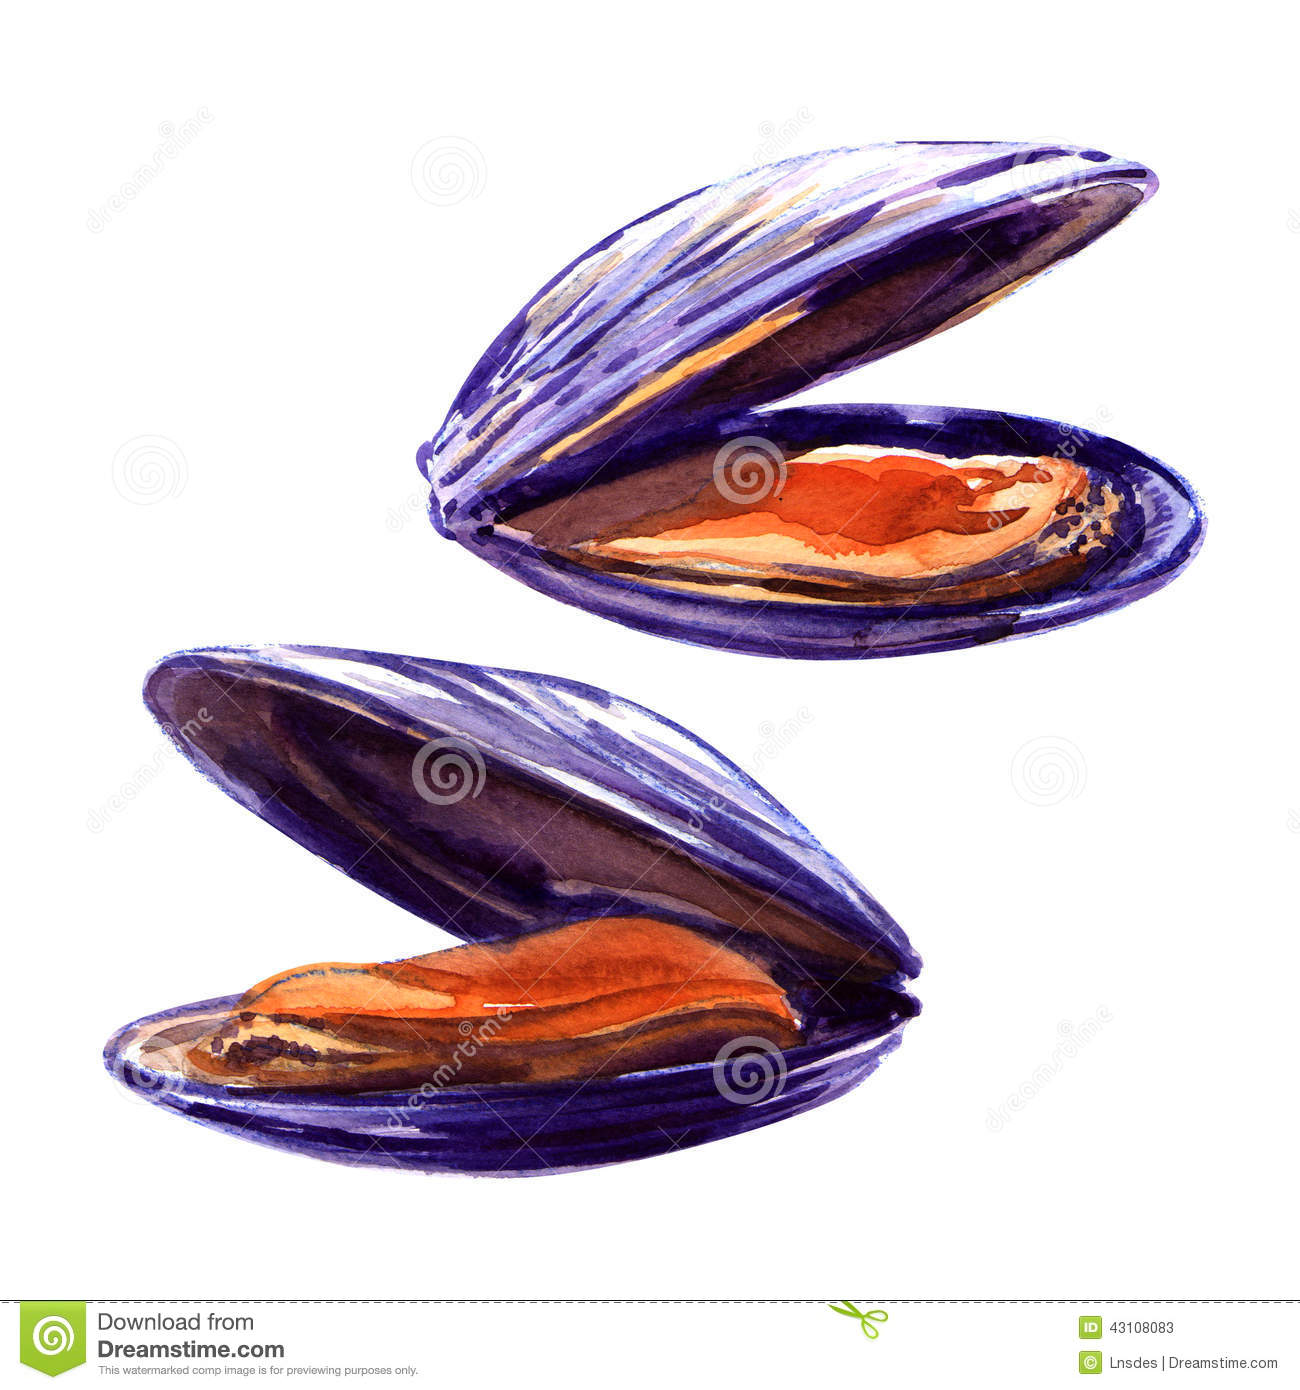 Mussel clipart #8, Download drawings